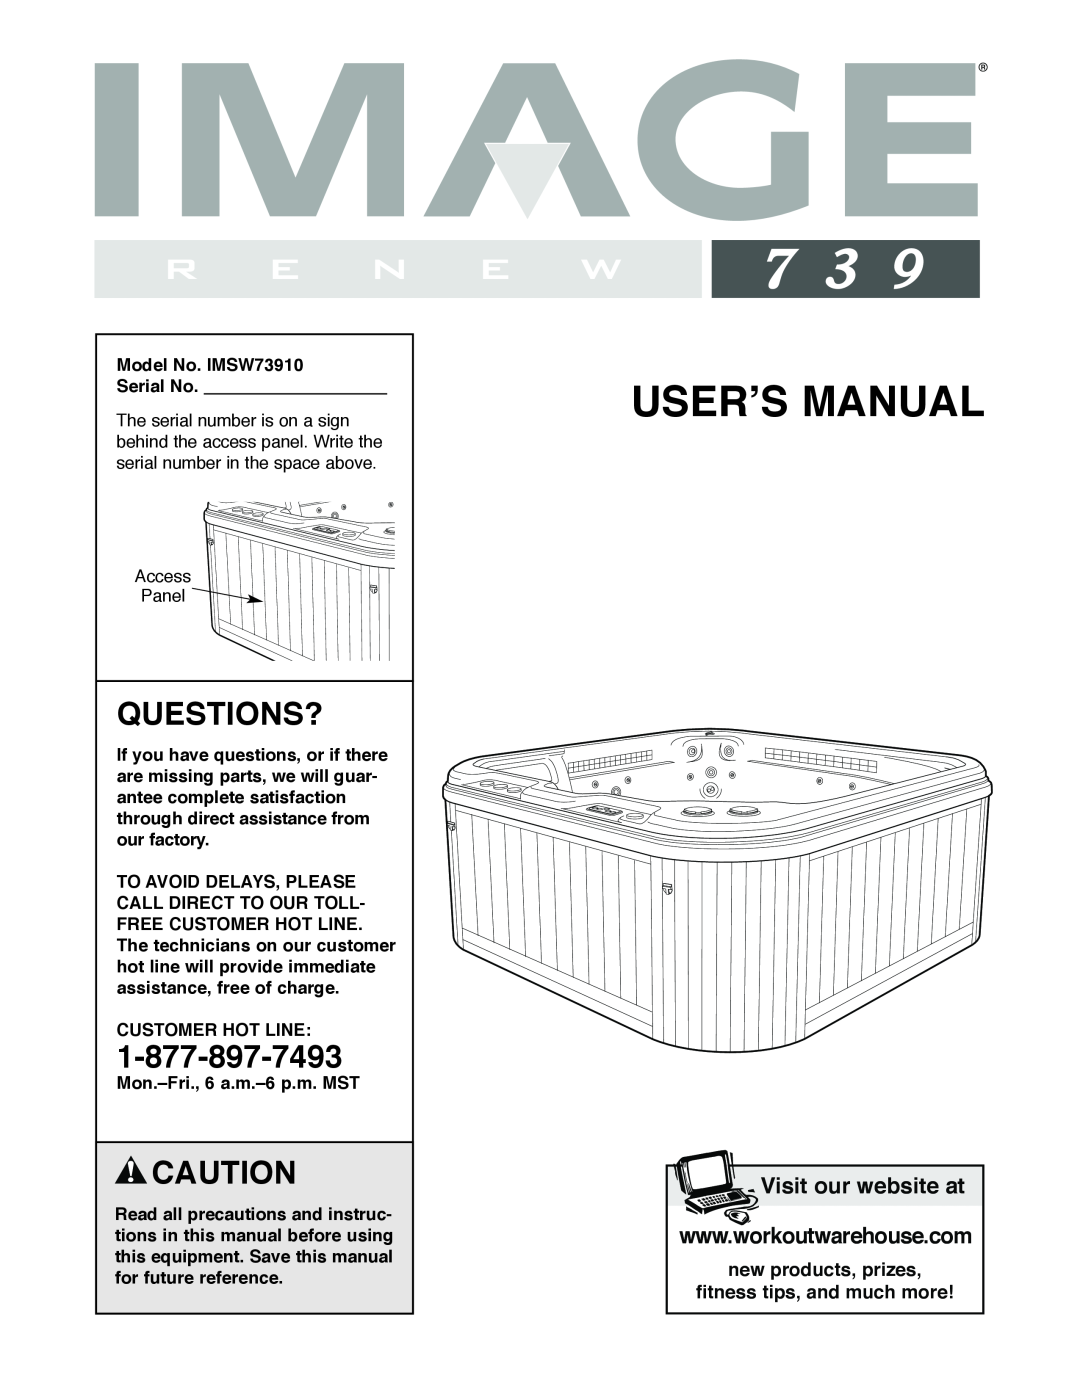 Image IMSW73910 user manual Questions?, User’S Manual, new products, prizes fitness tips, and much more 